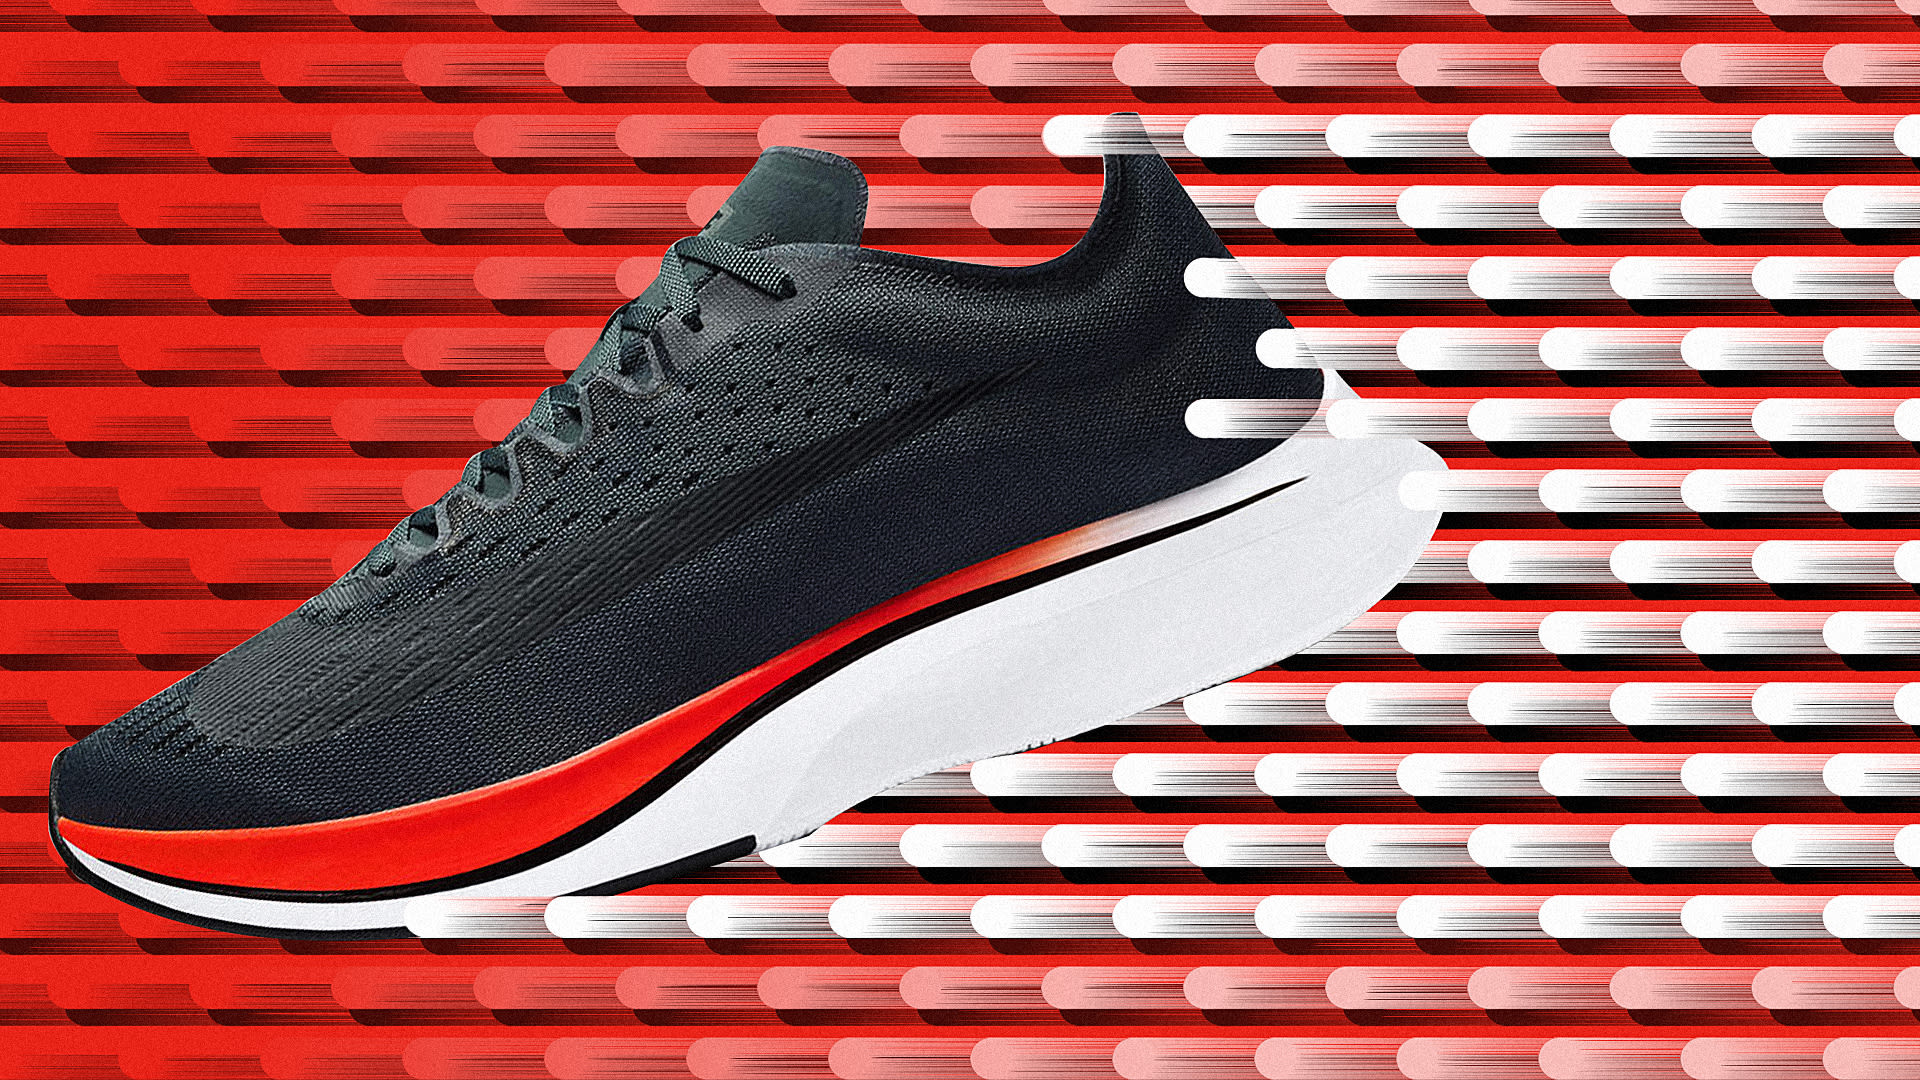 Yes, Nike’s $250 Vaporfly shoes really can make you faster